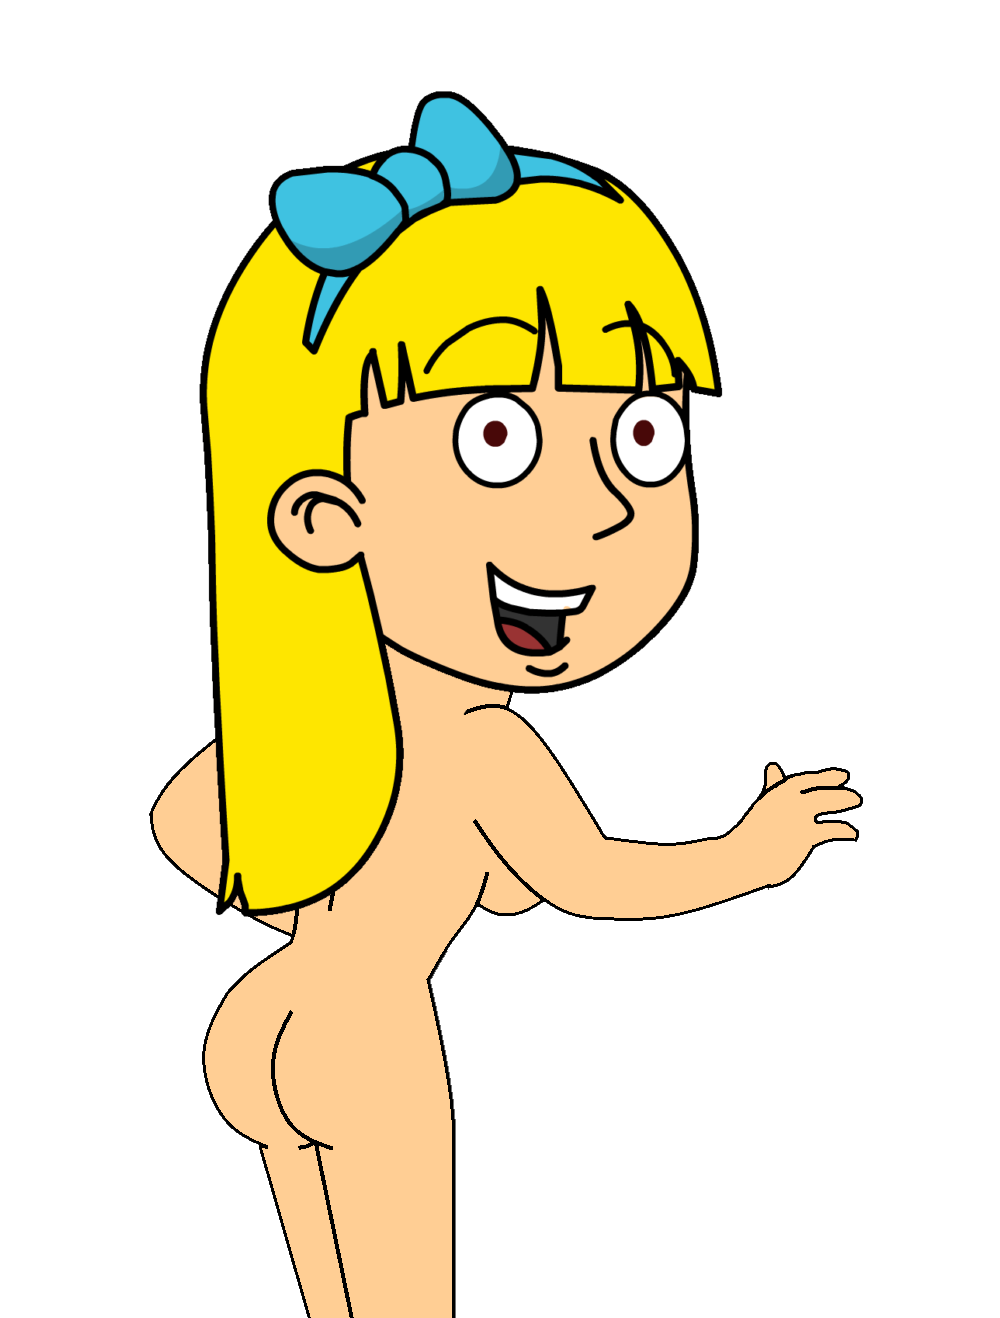 ass ass backview bowtie cartoon goanimate grin lily lily_anderson nude nude sexy sexy_ass vyond yellow_hair